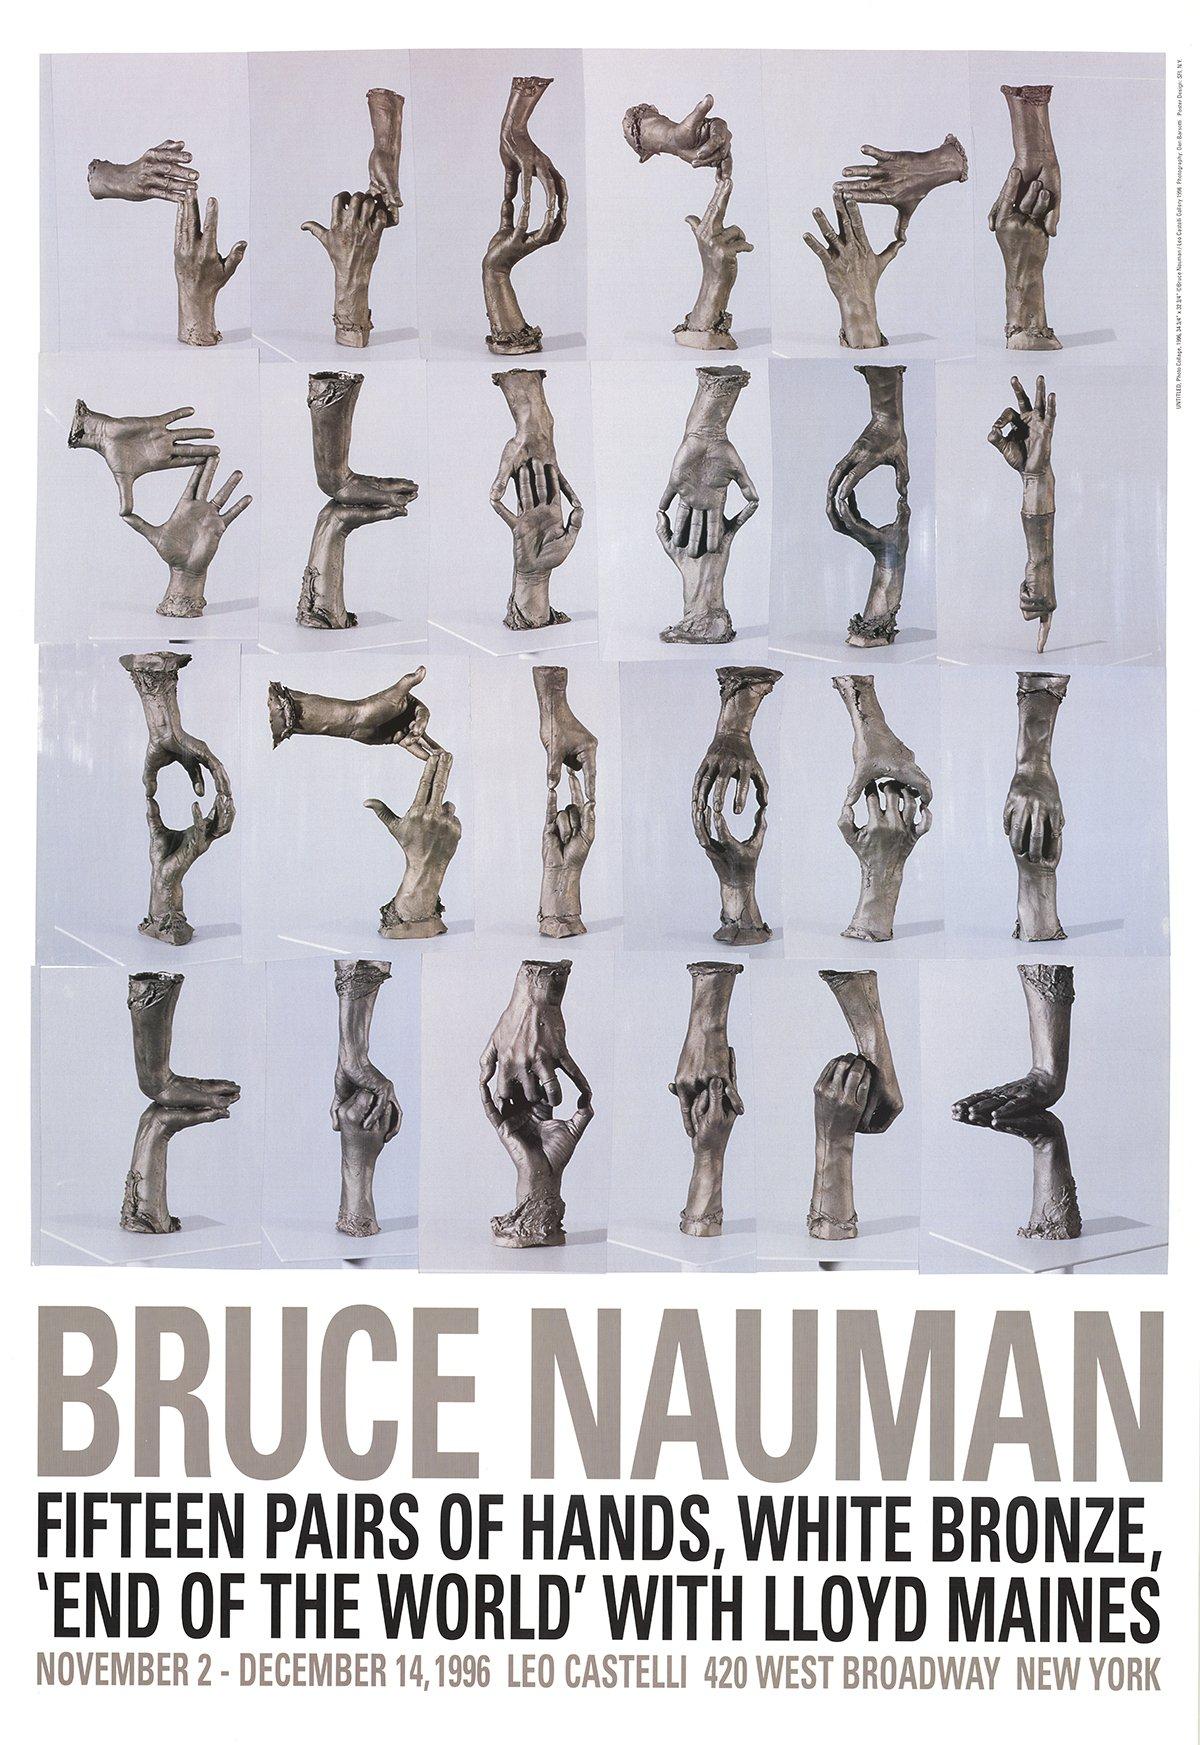 Paper Size: 36.5 x 25 inches ( 92.71 x 63.5 cm )
 Image Size: 29 x 25 inches ( 73.66 x 63.5 cm )
 Framed: No
 Condition: A-: Near Mint, very light signs of handling
 
 Additional Details: Original exhibition poster by Bruce Nauman introducing his